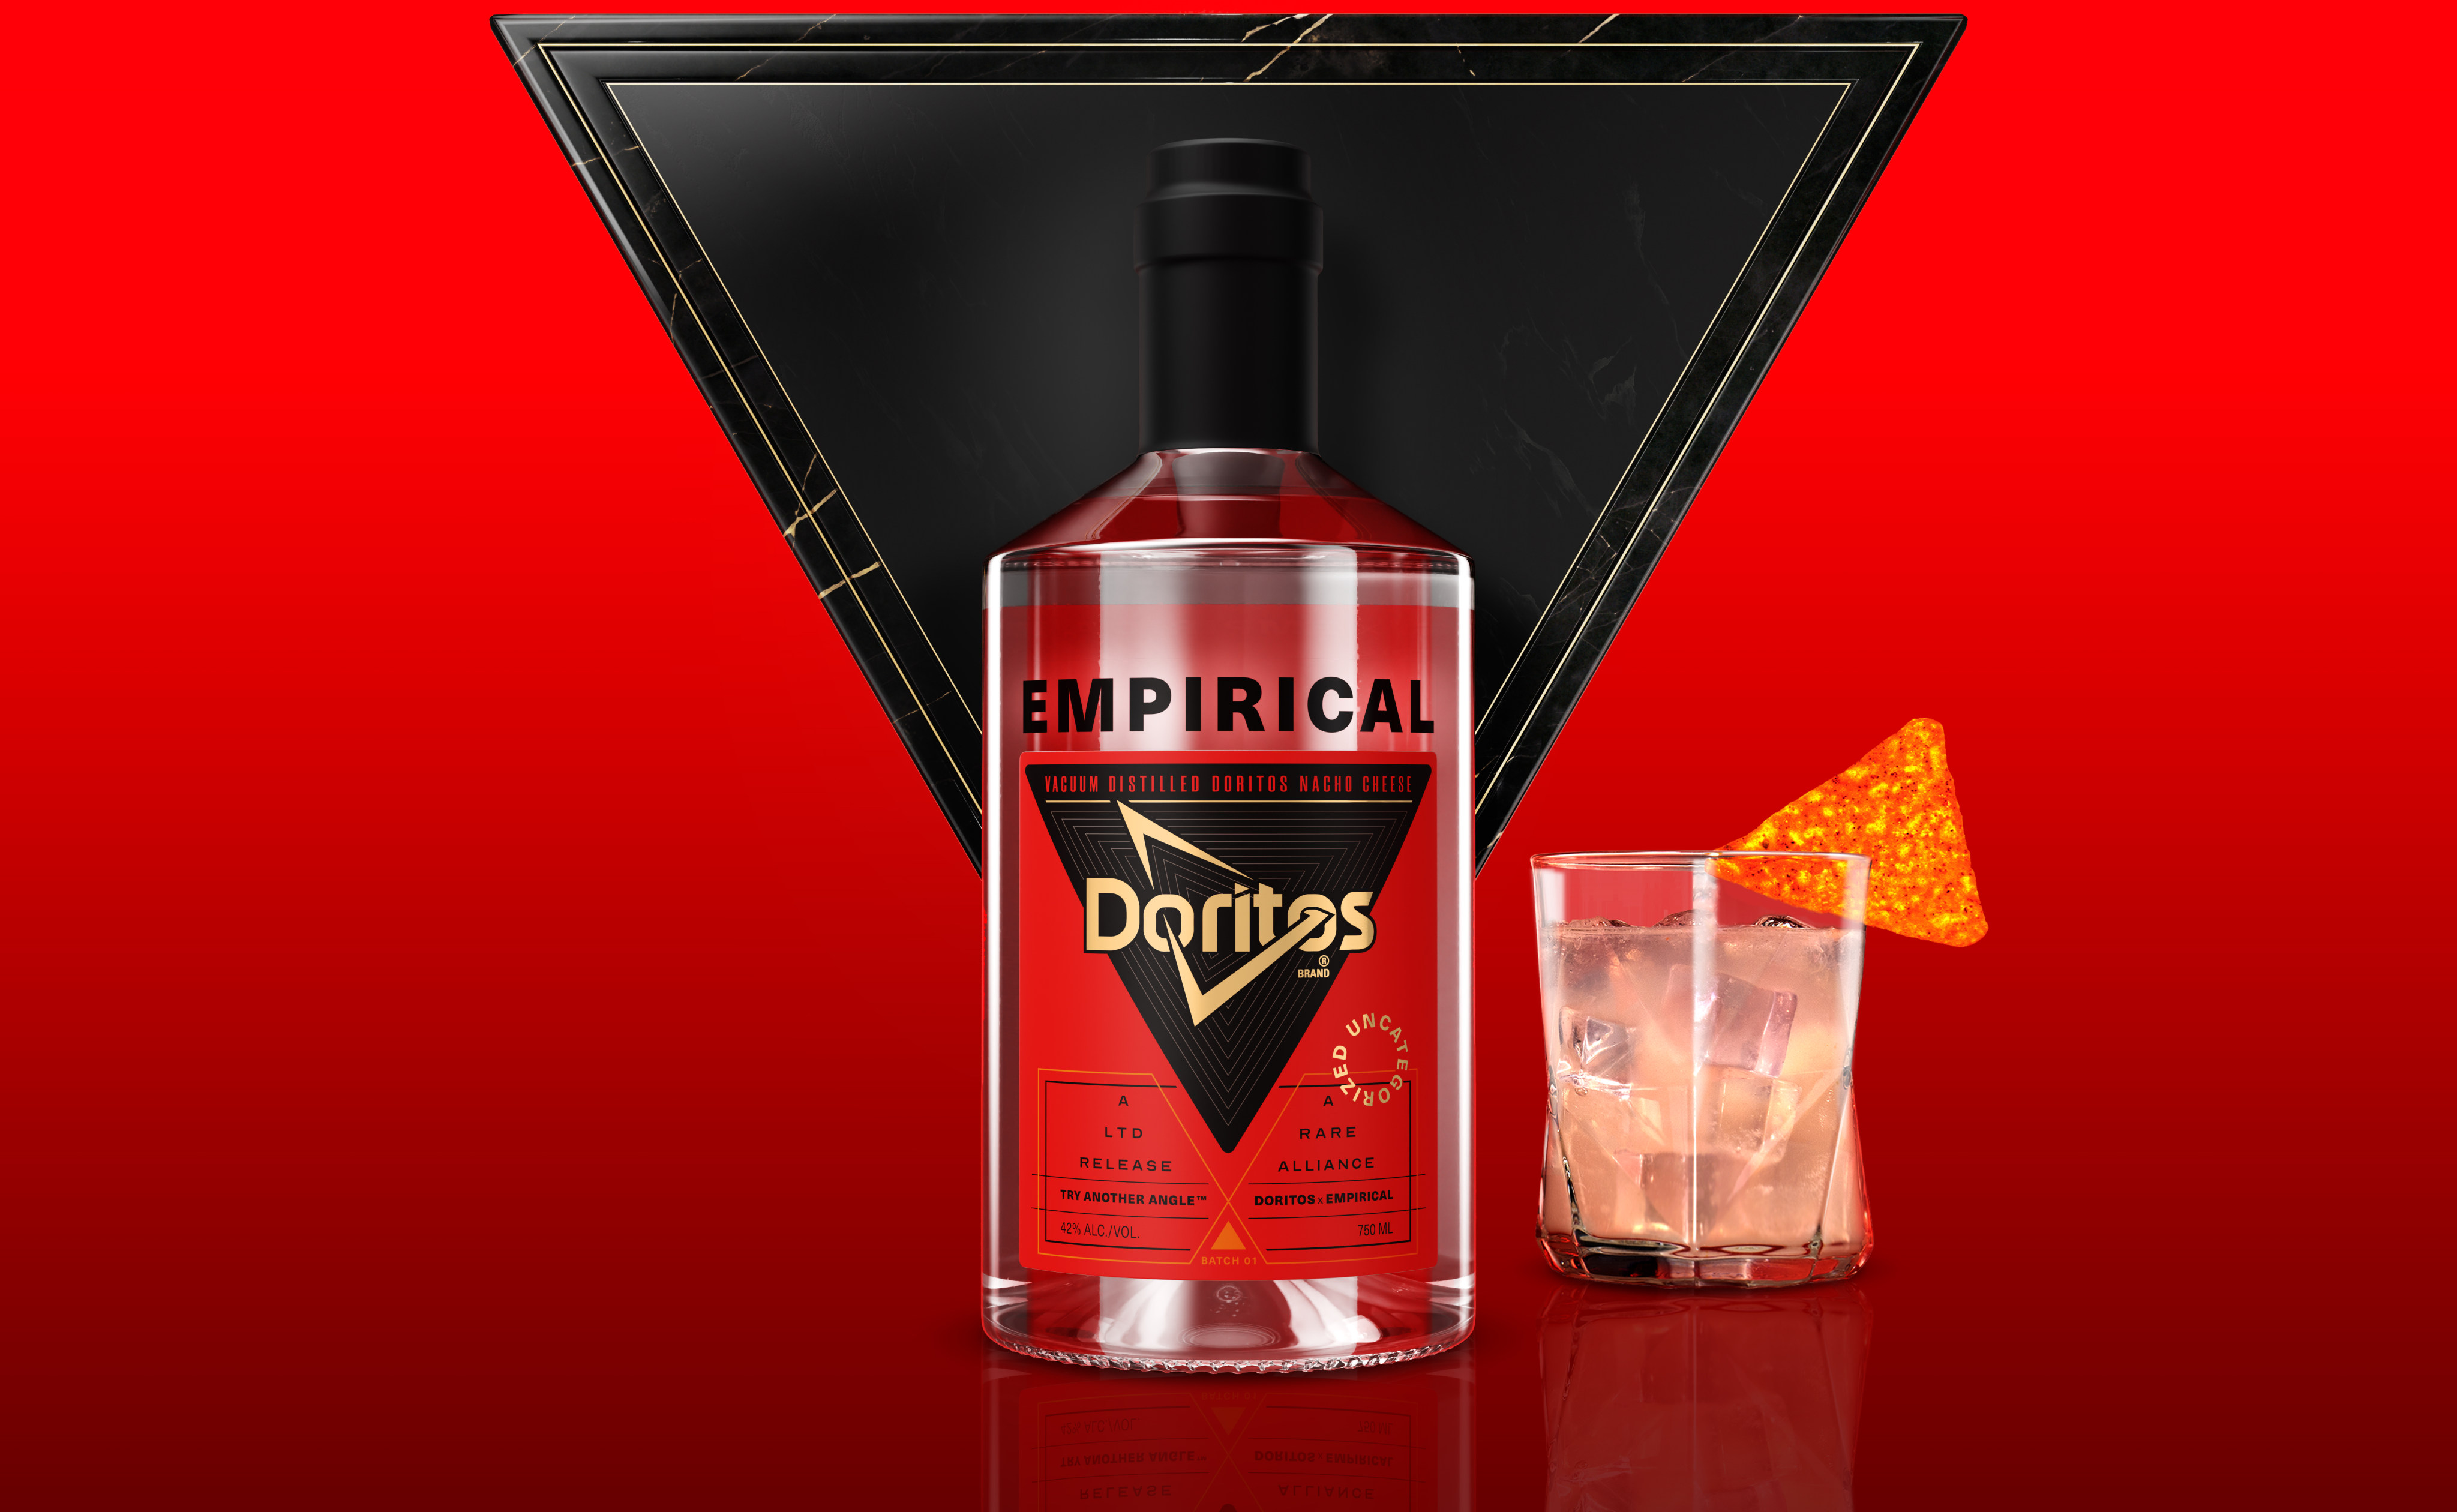 Empirical and Doritos have collaborated on a nacho cheese tortilla chip-flavoured spirit. We are not kidding. Photo: PepsiCo Design